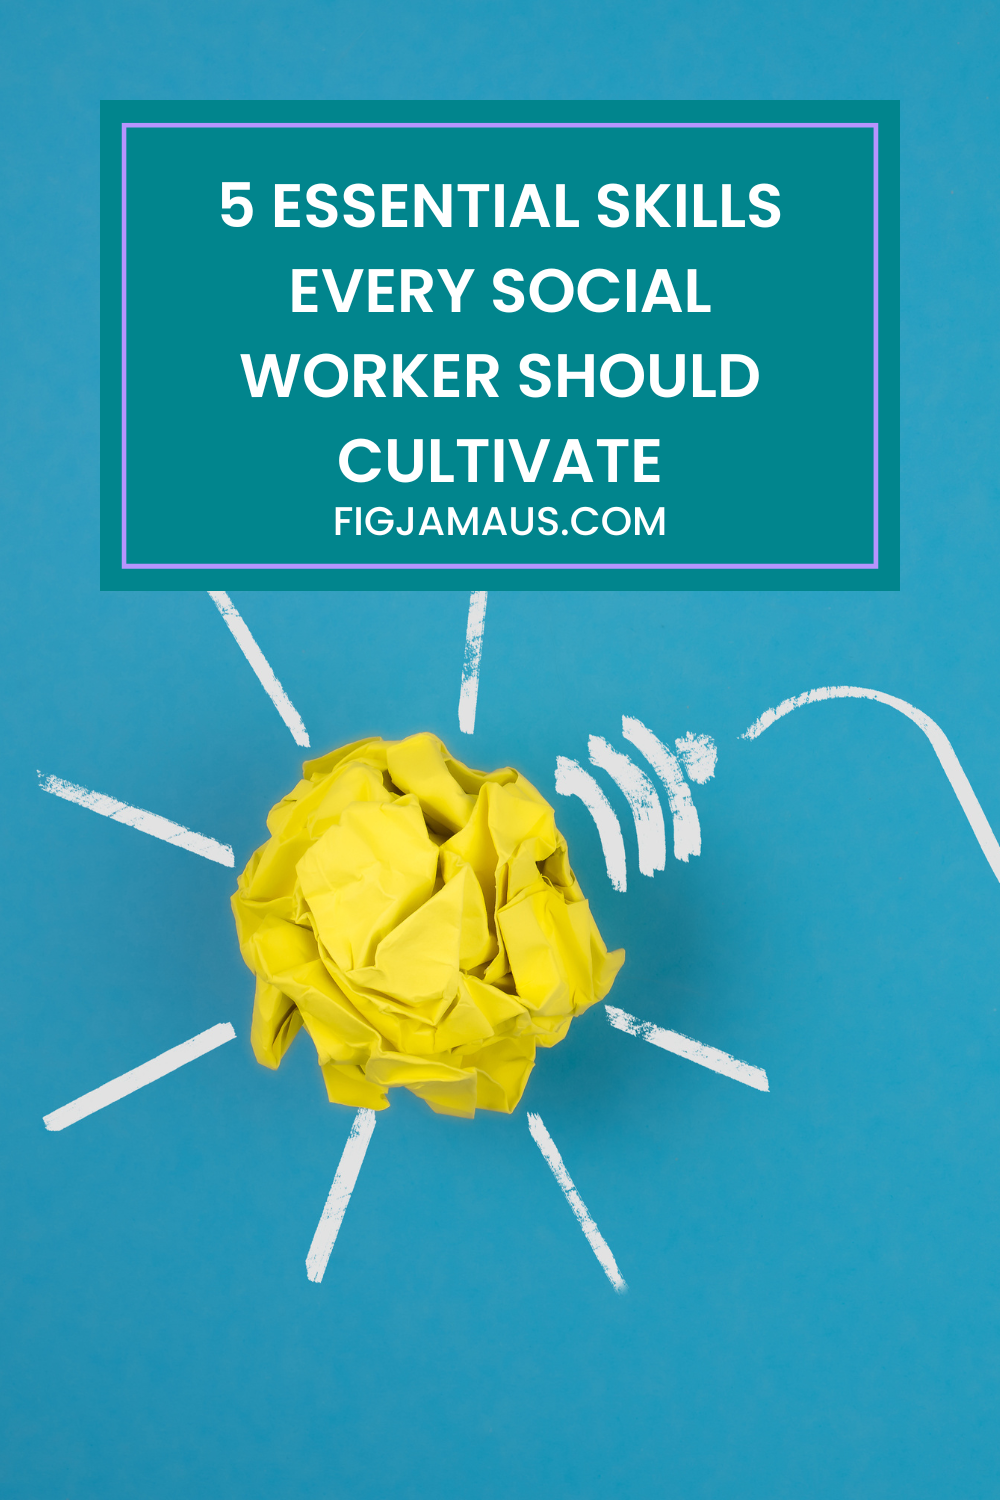 5 essential skills every social worker should cultivate